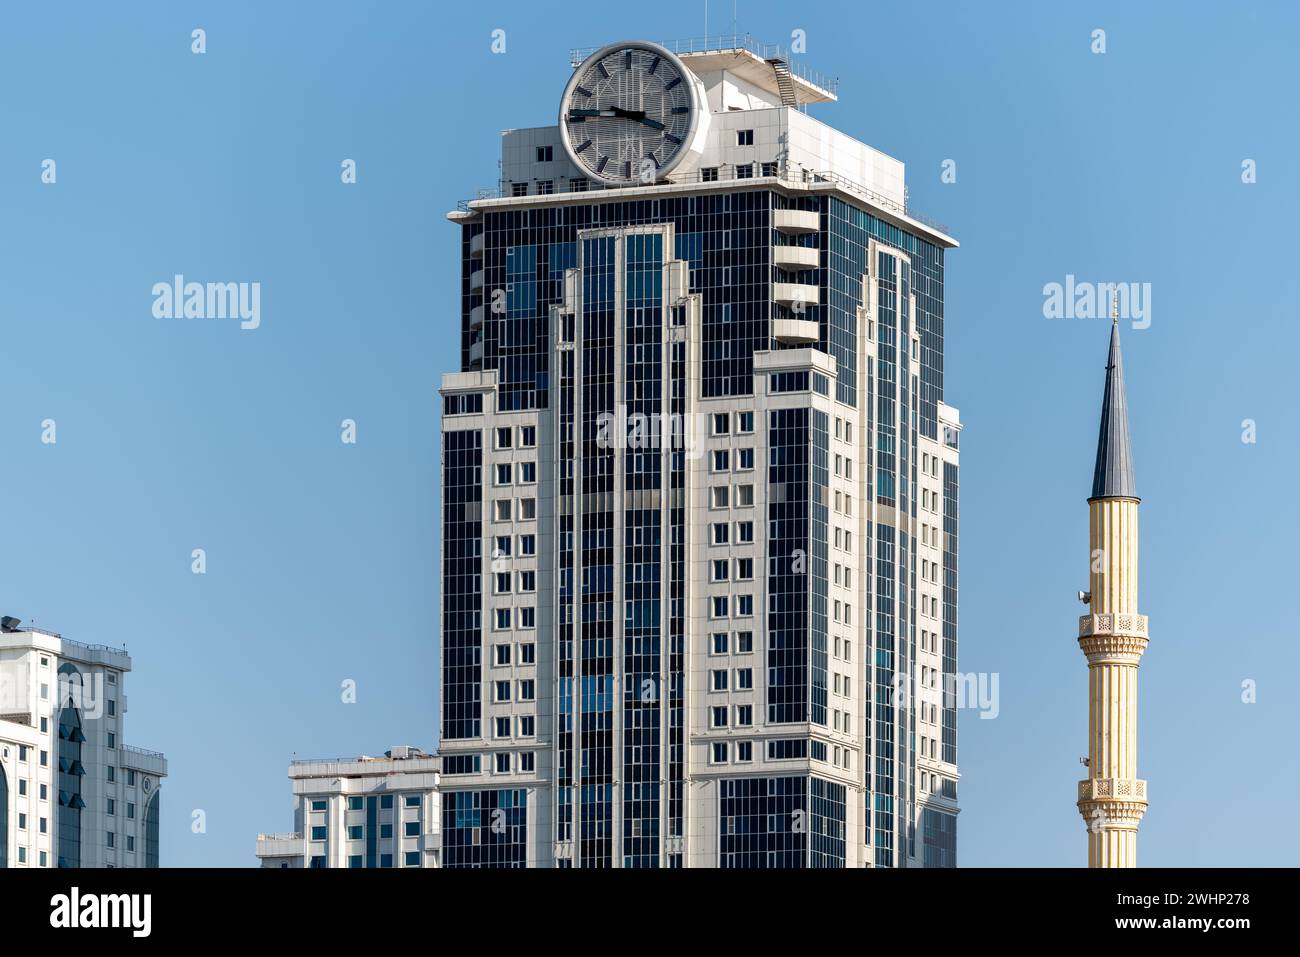 Minaret of traditional Islamic mosque and tall modern skyscrapers in Grozny Chechnya Stock Photo